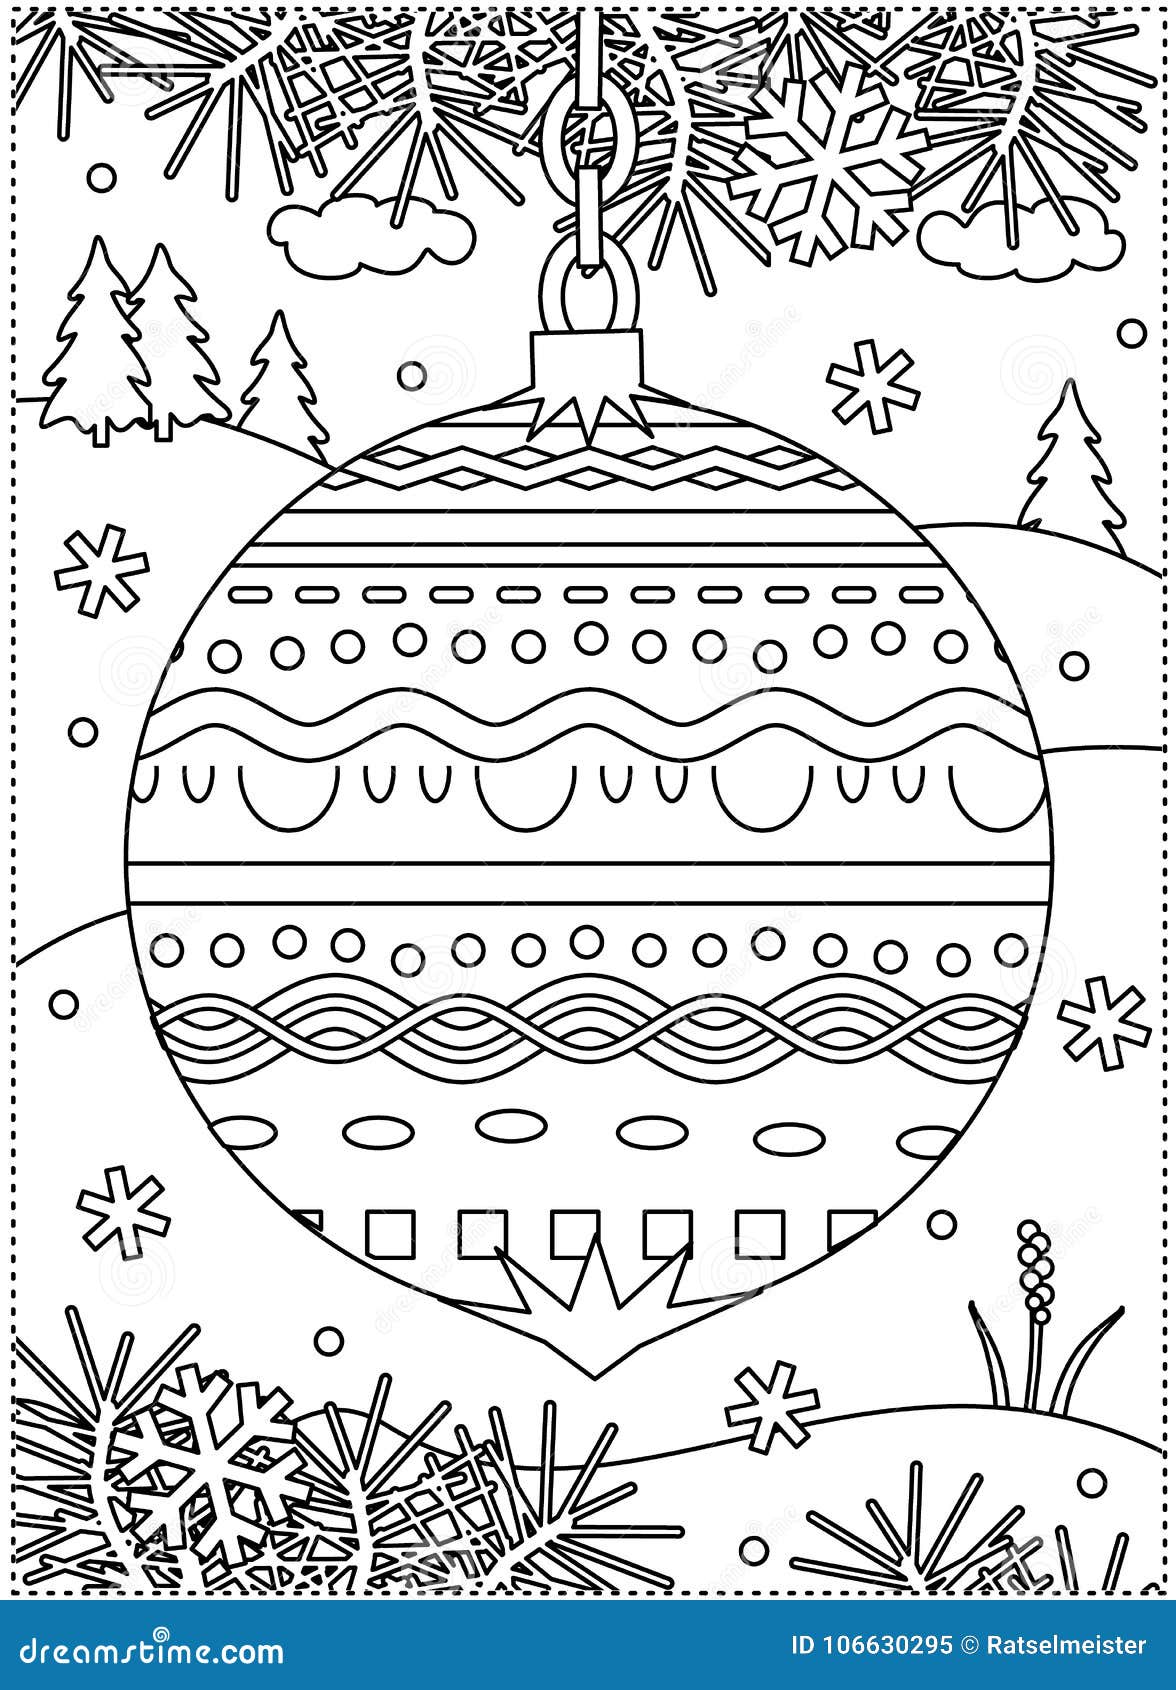 Winter Holidays Coloring Page With Decorated Ornament